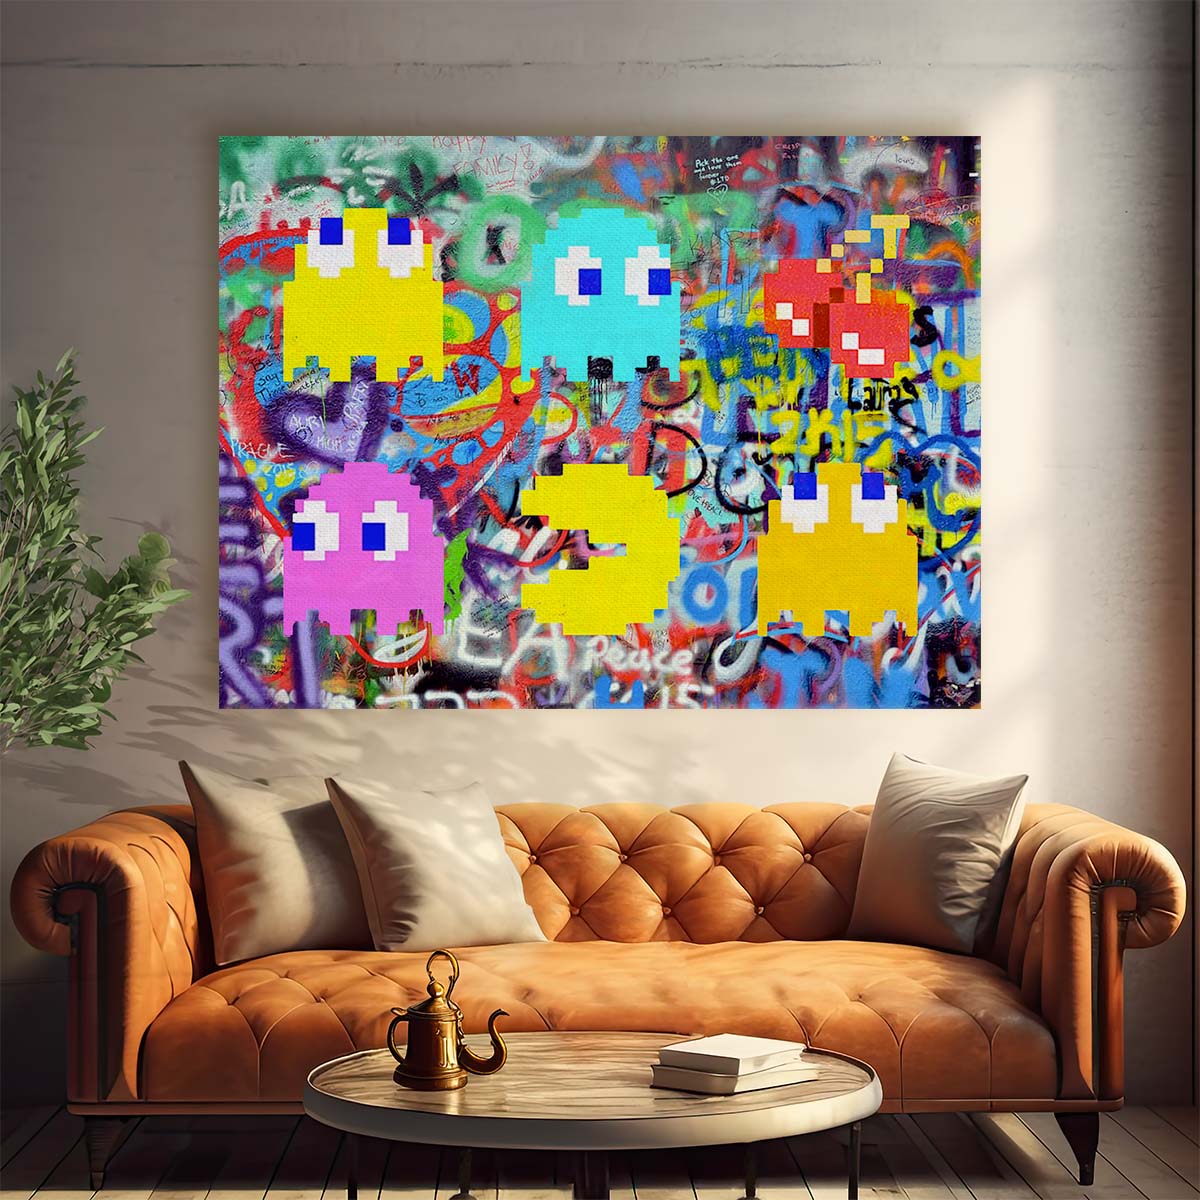 Pacman Graffiti Wall Art by Luxuriance Designs. Made in USA.